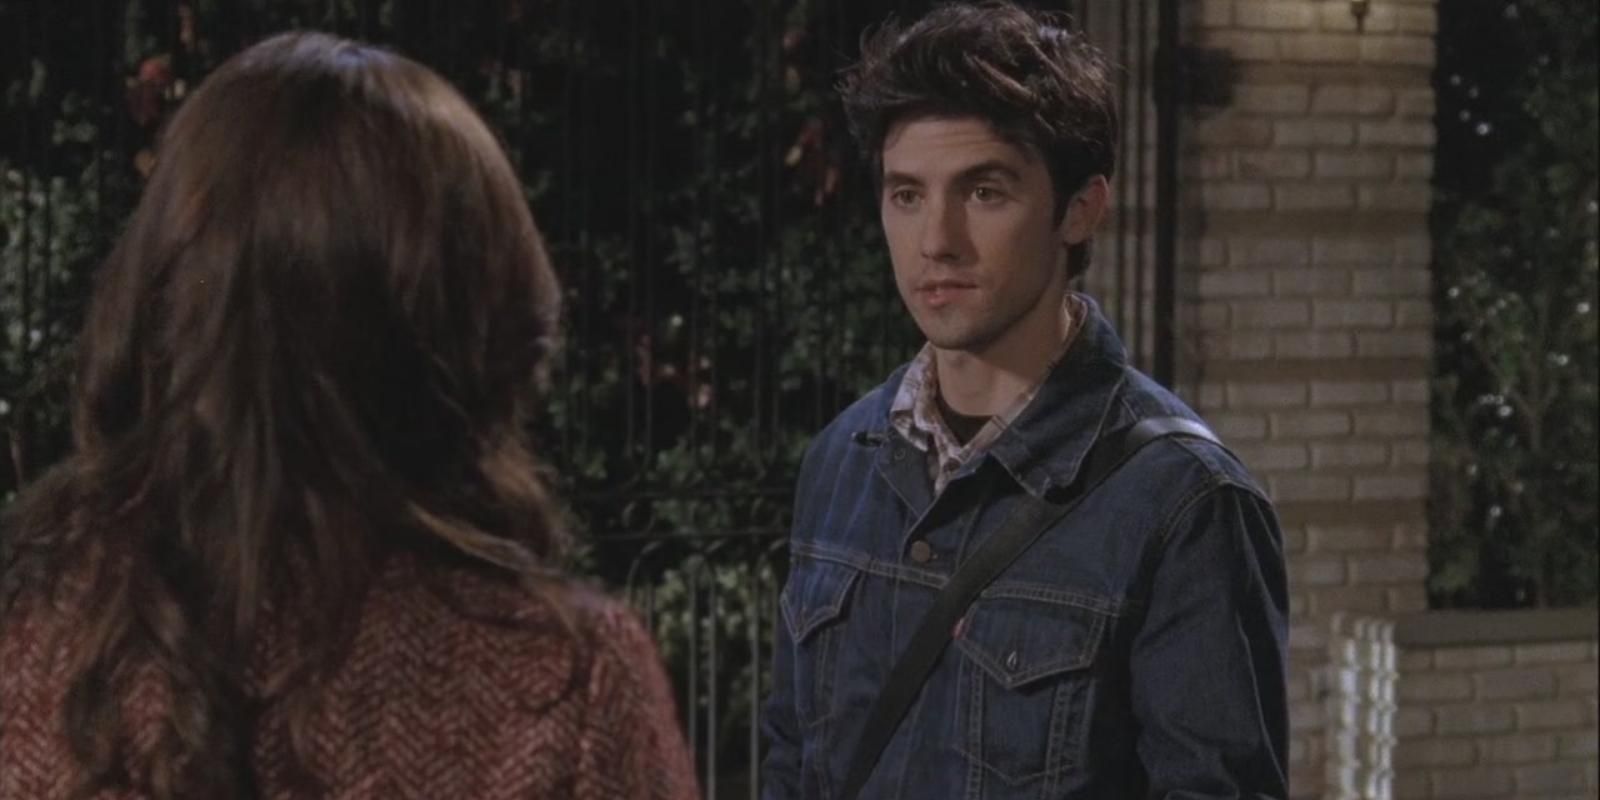 Jess Mariano visits Rory Gilmore in season 6 of Gilmore Girls